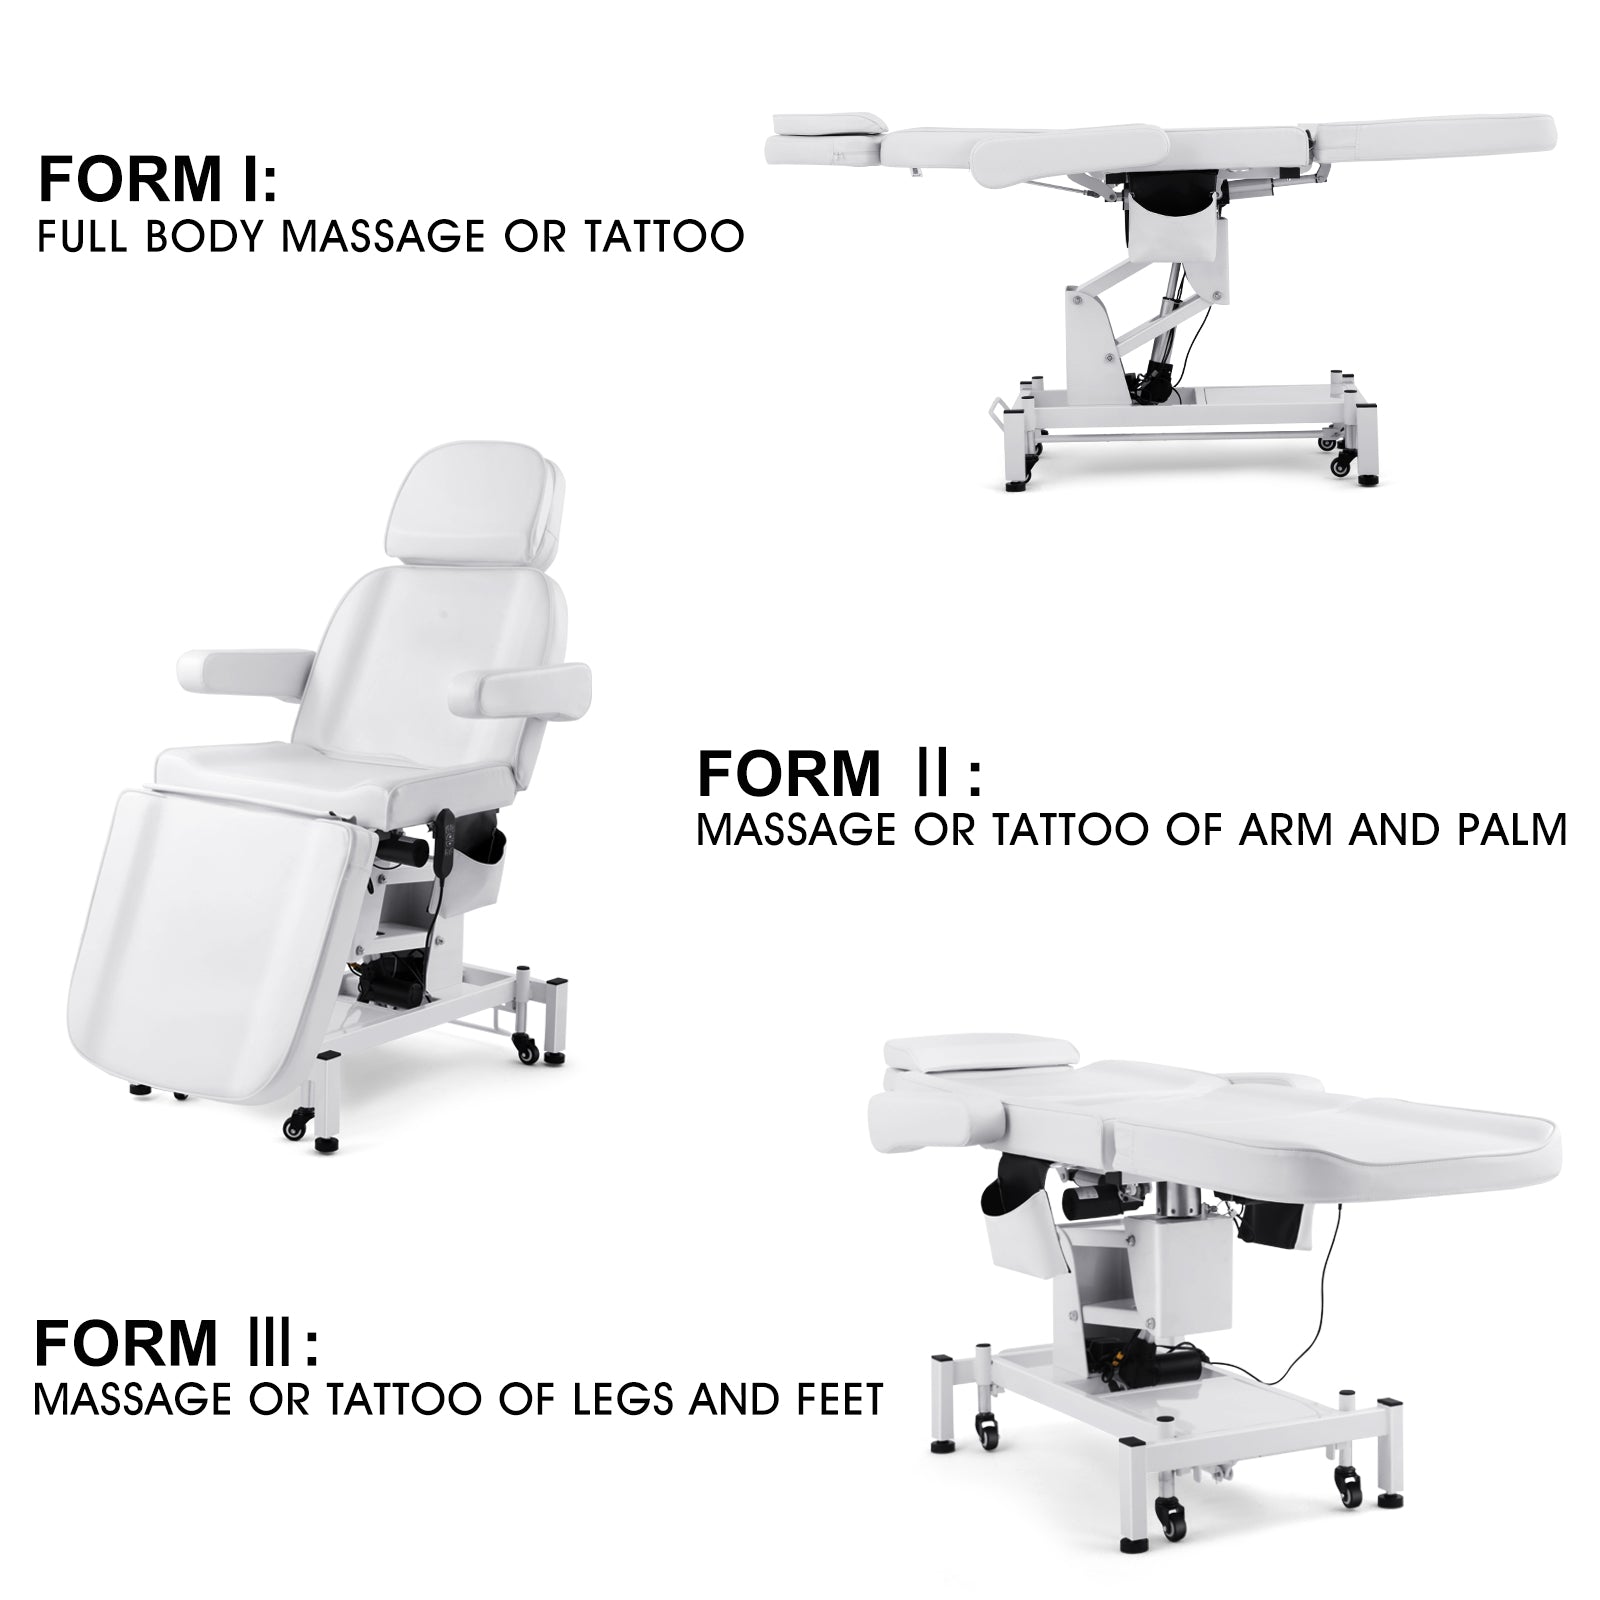 #2908 3 Motor Electrical Facial Bed for Esthetician 110V Removable Massage Table Beauty Bed Medical Aesthetic Tattoo Chair with Rotatable Armrests